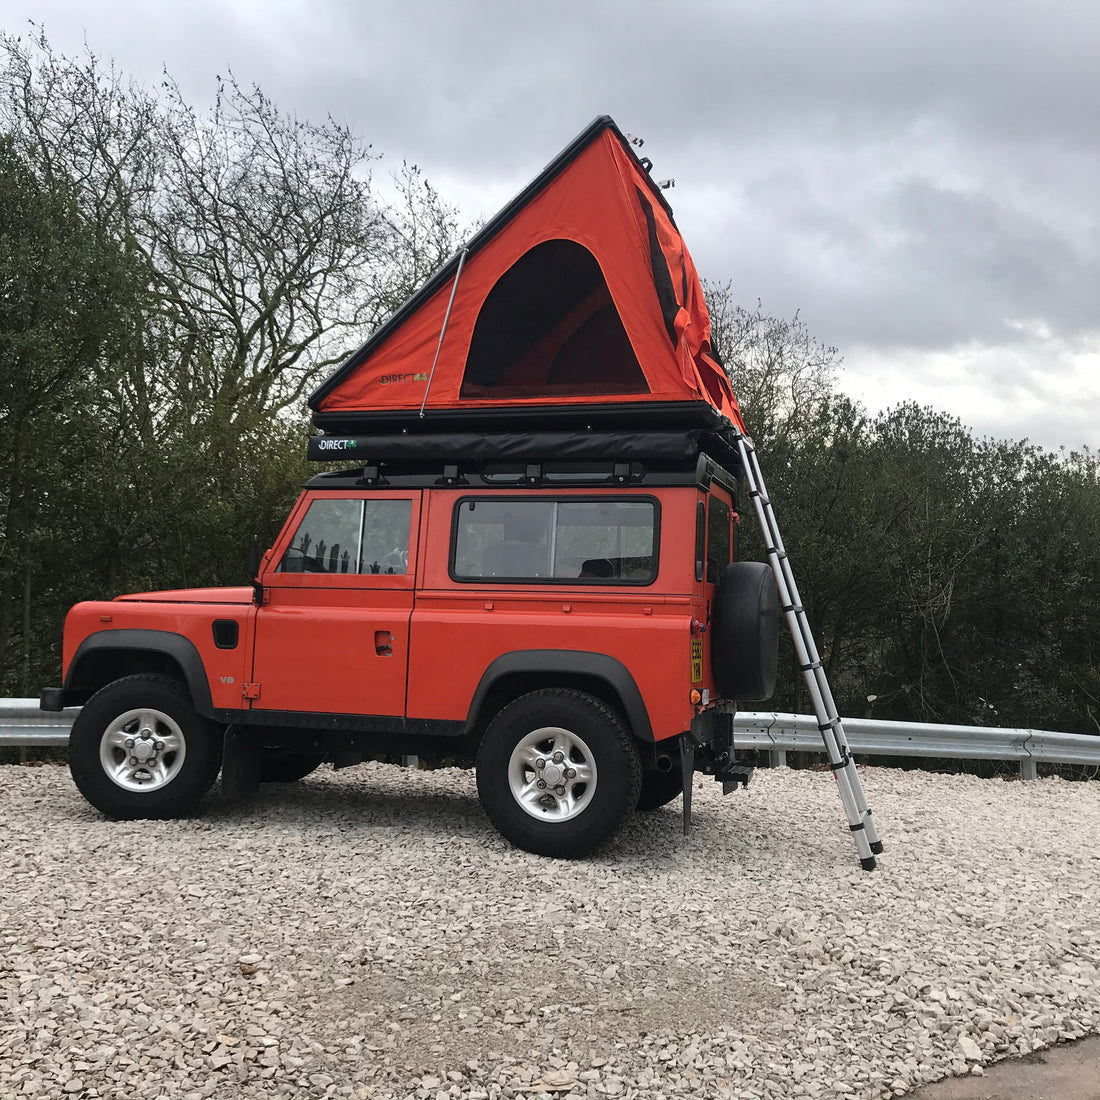 Direct4x4 Adventurer 2 person roof top camping tent in orange on an orange Land Rover Defender 90